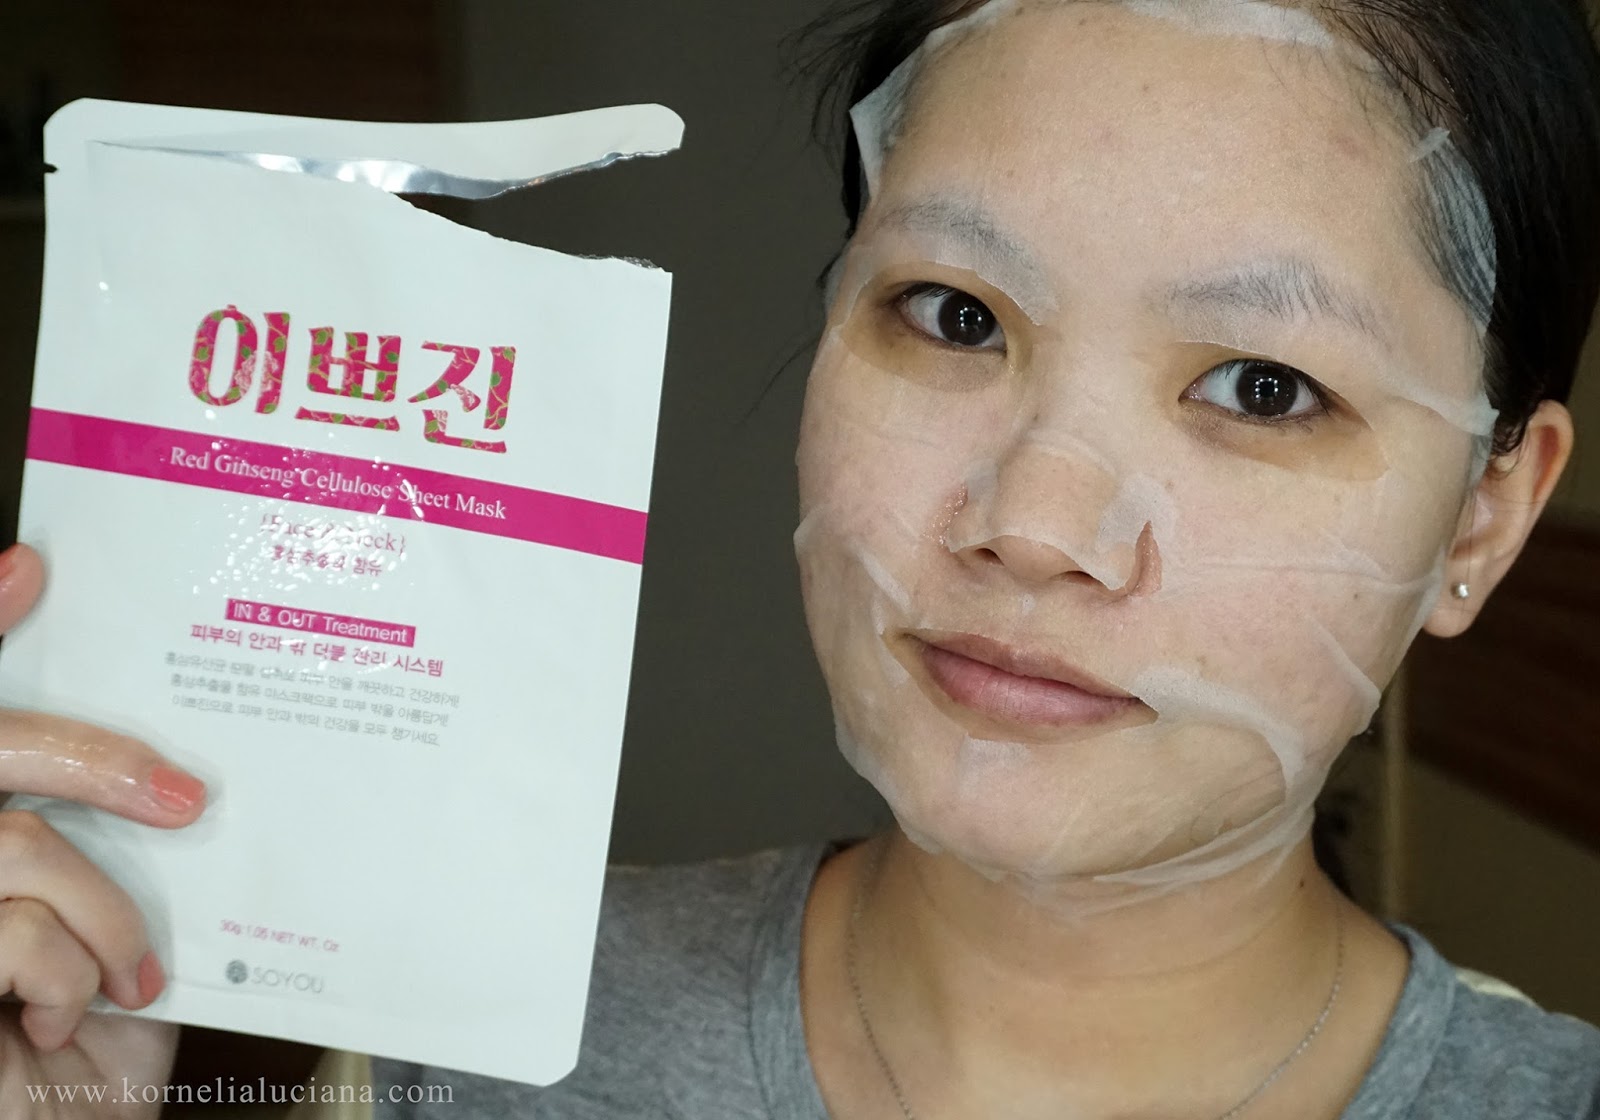 REVIEW Soyou Red Ginseng Cellulose Sheet Mask Tampil Cantik